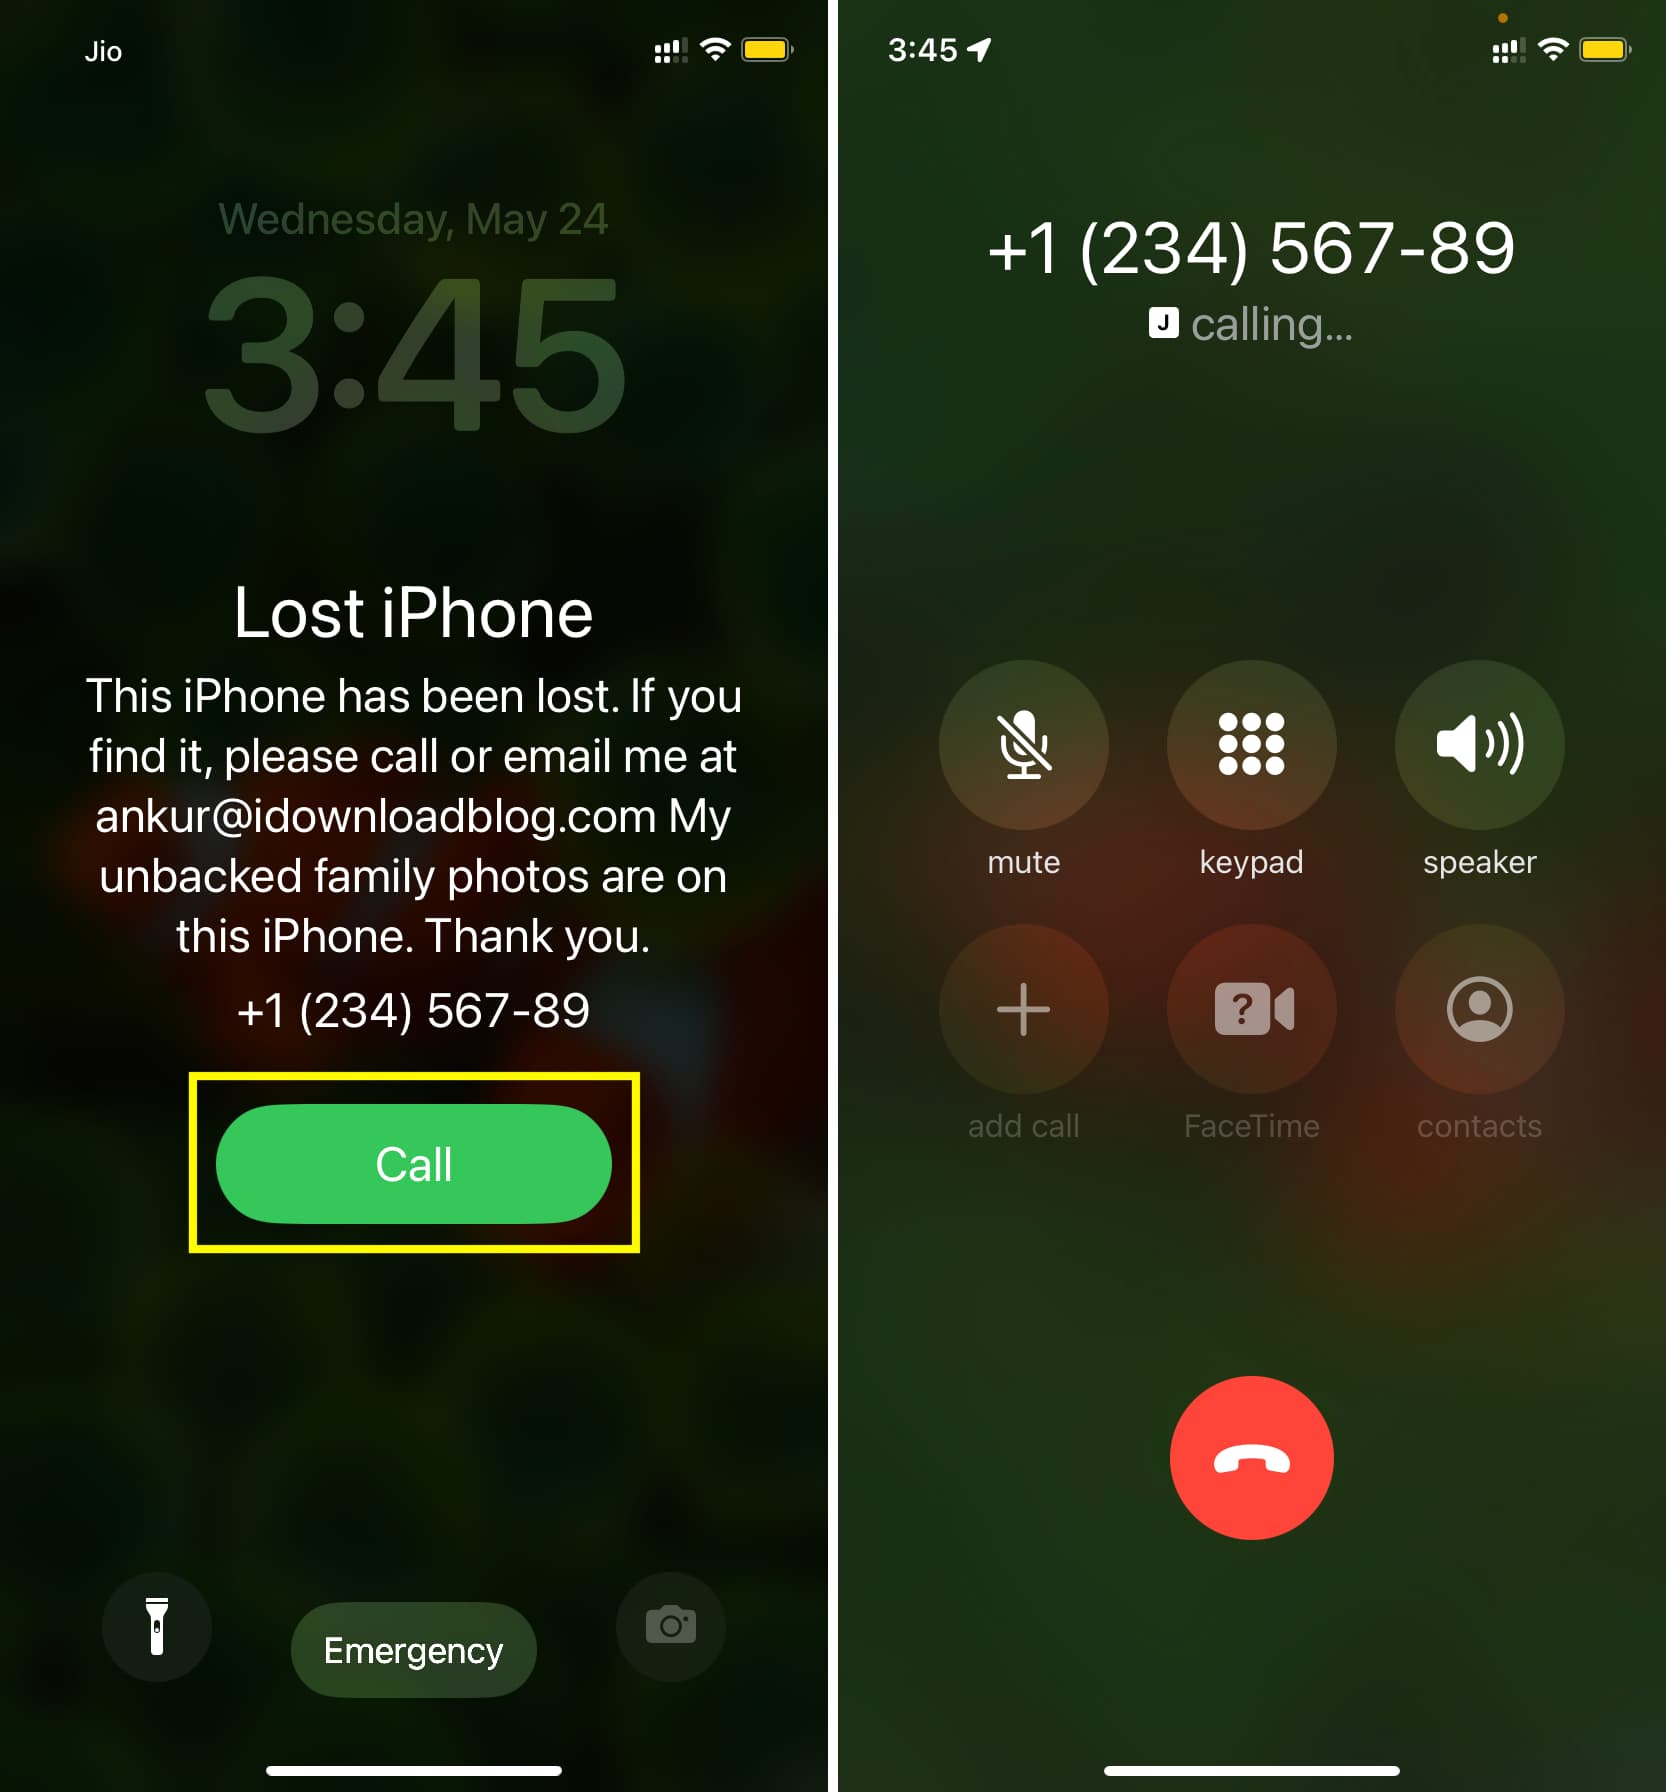 Call button on the lost iPhone Lock Screen to reach the original owner